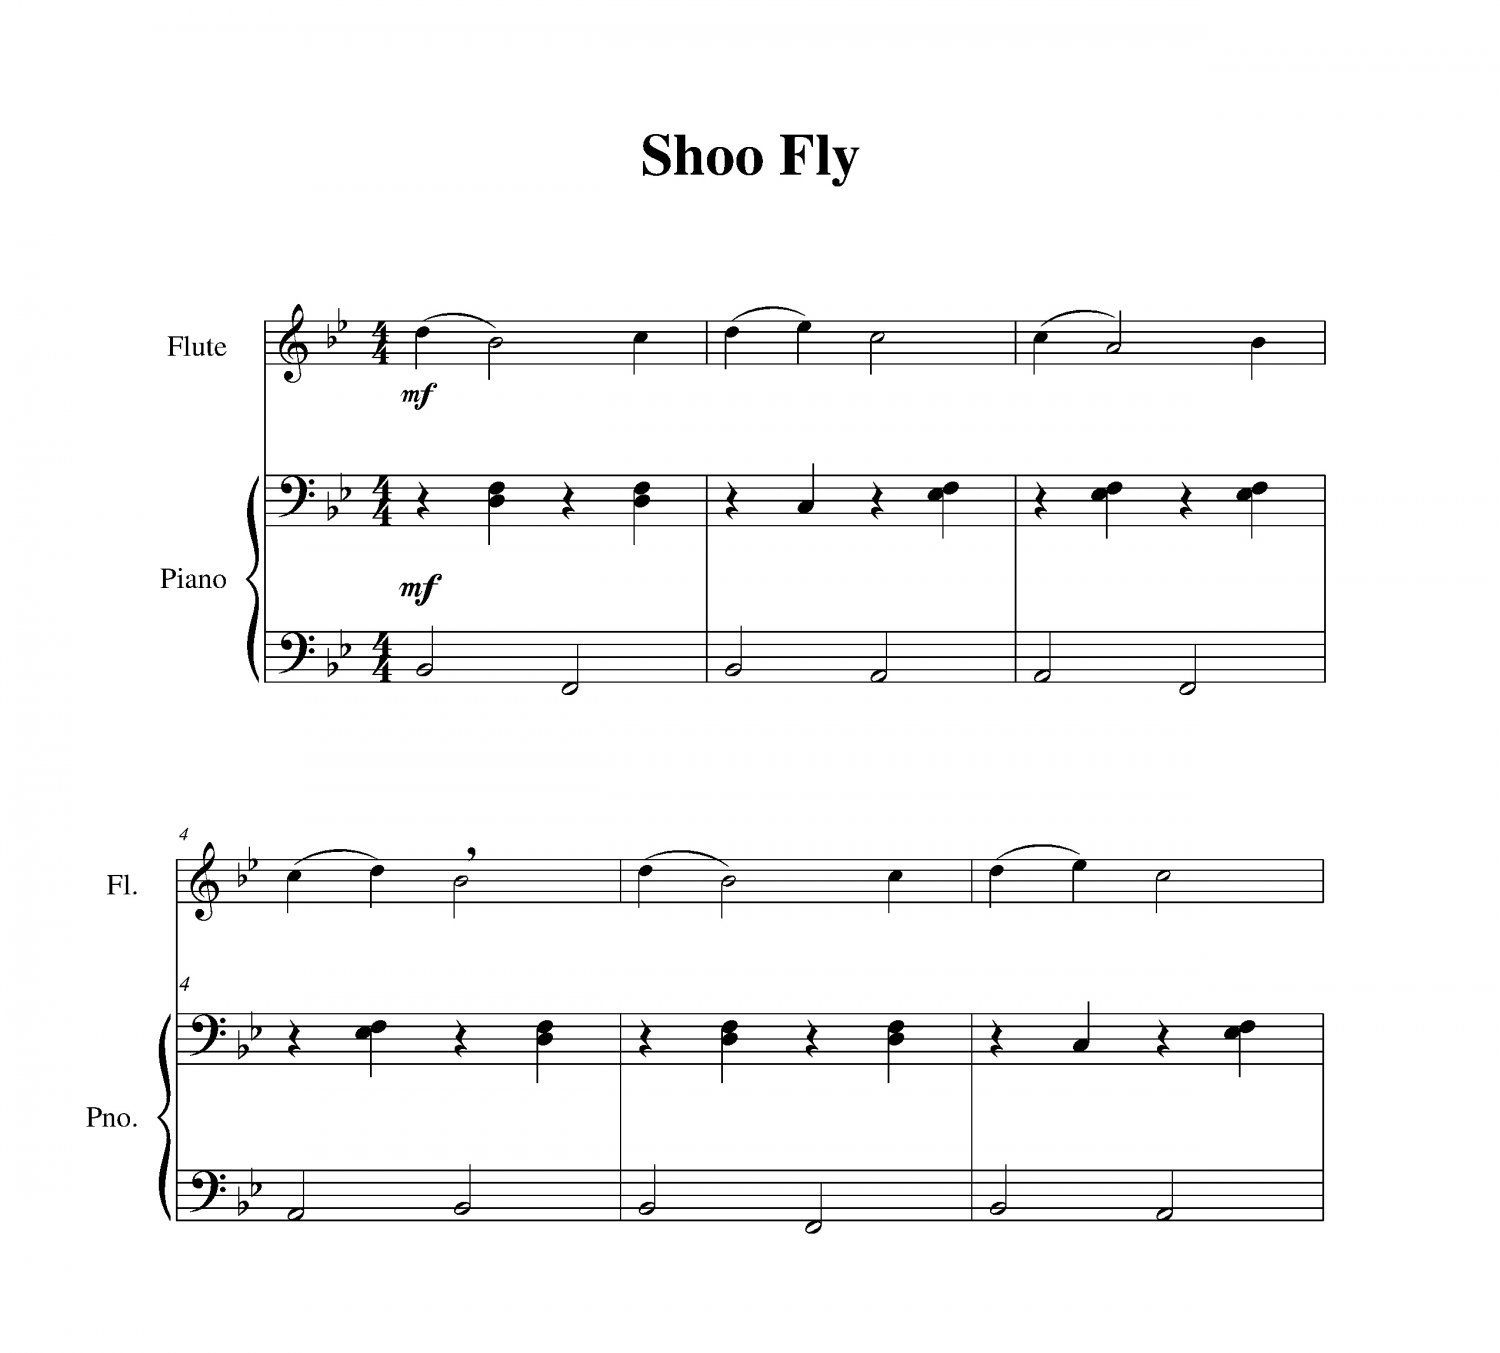 shoo fly mp3 free download